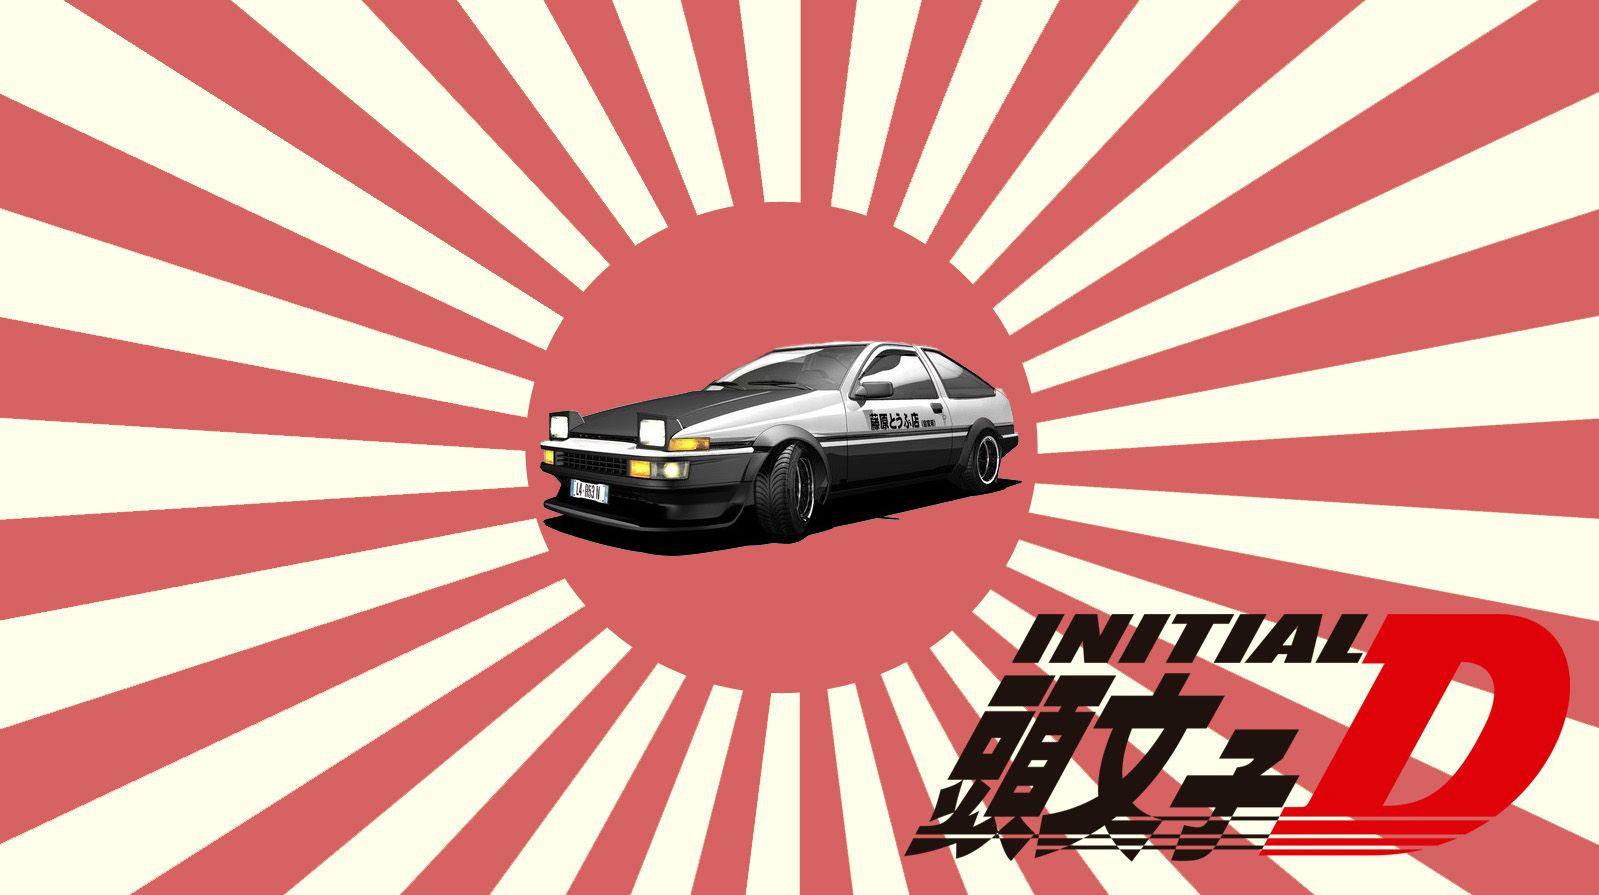 An AE86 wallpapers I just made : initiald